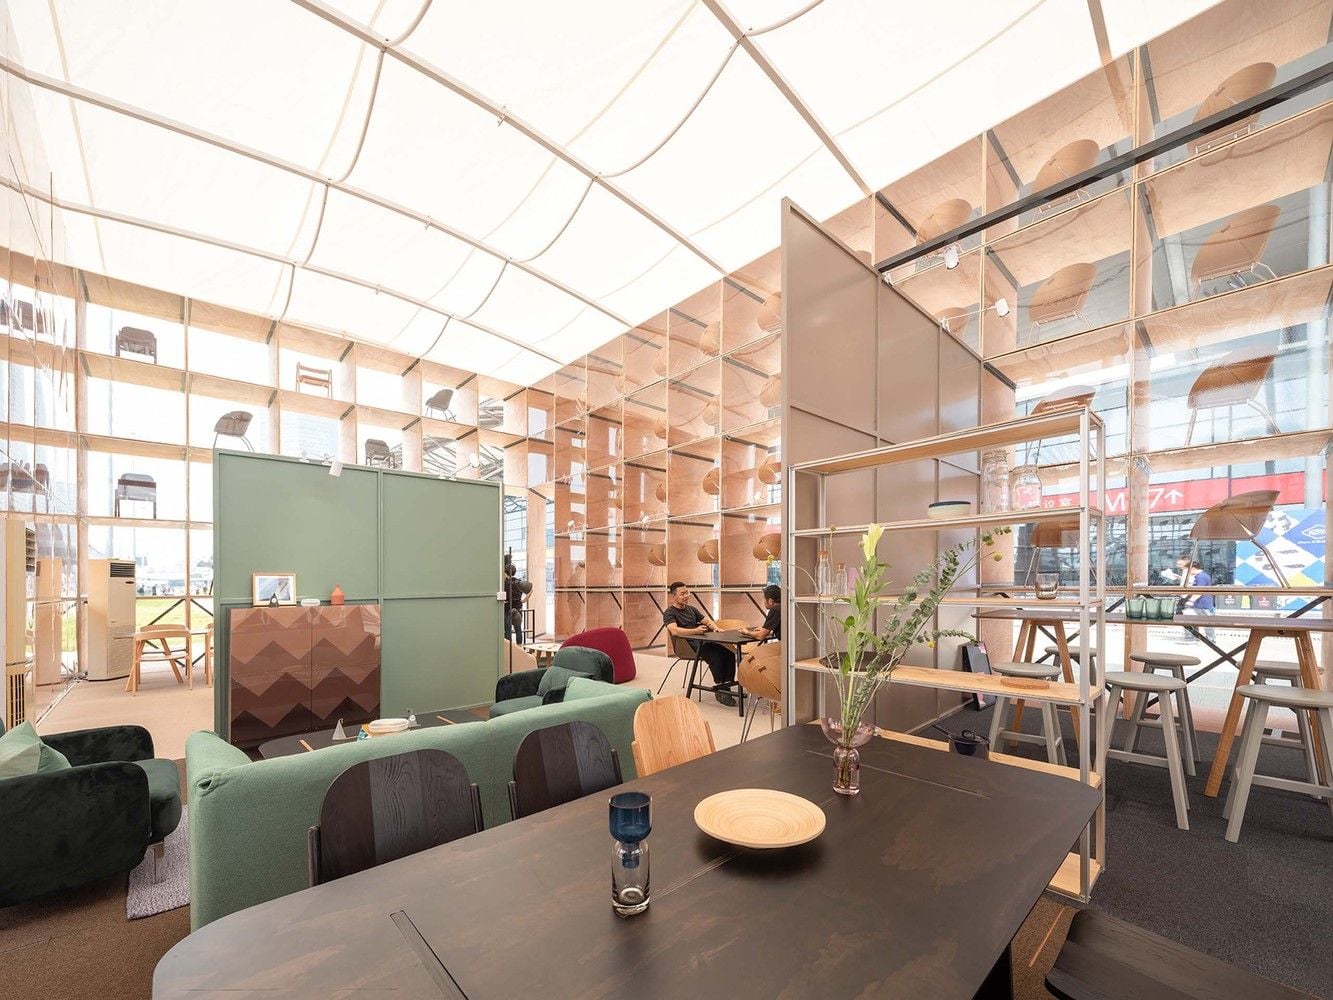 Inside the see-through pavilion, simple stylish furnishings abound.